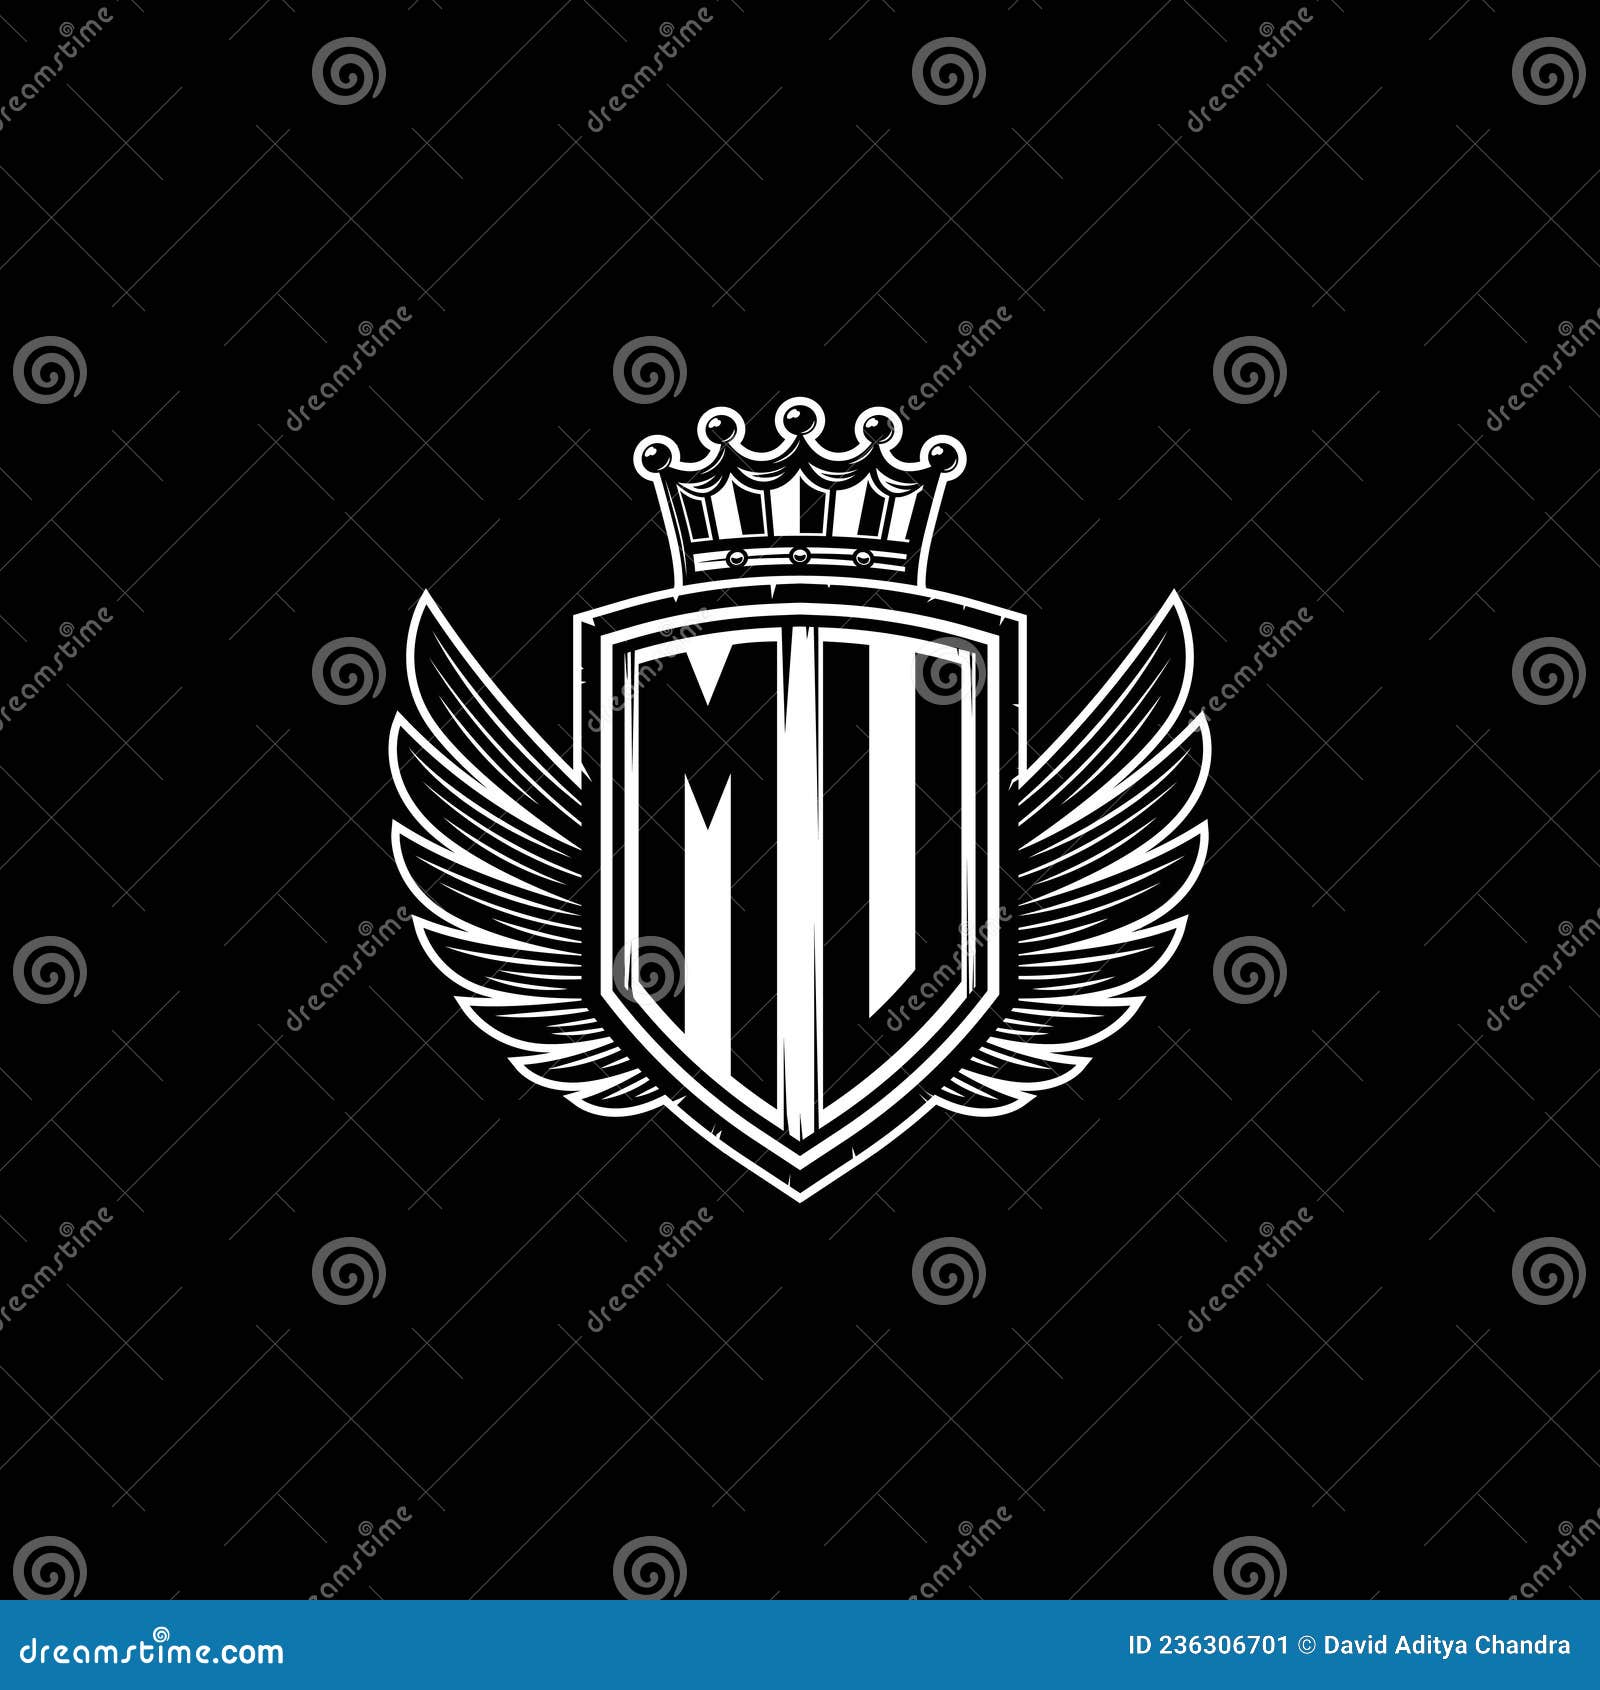 Initials mm logo monogram with shield Royalty Free Vector